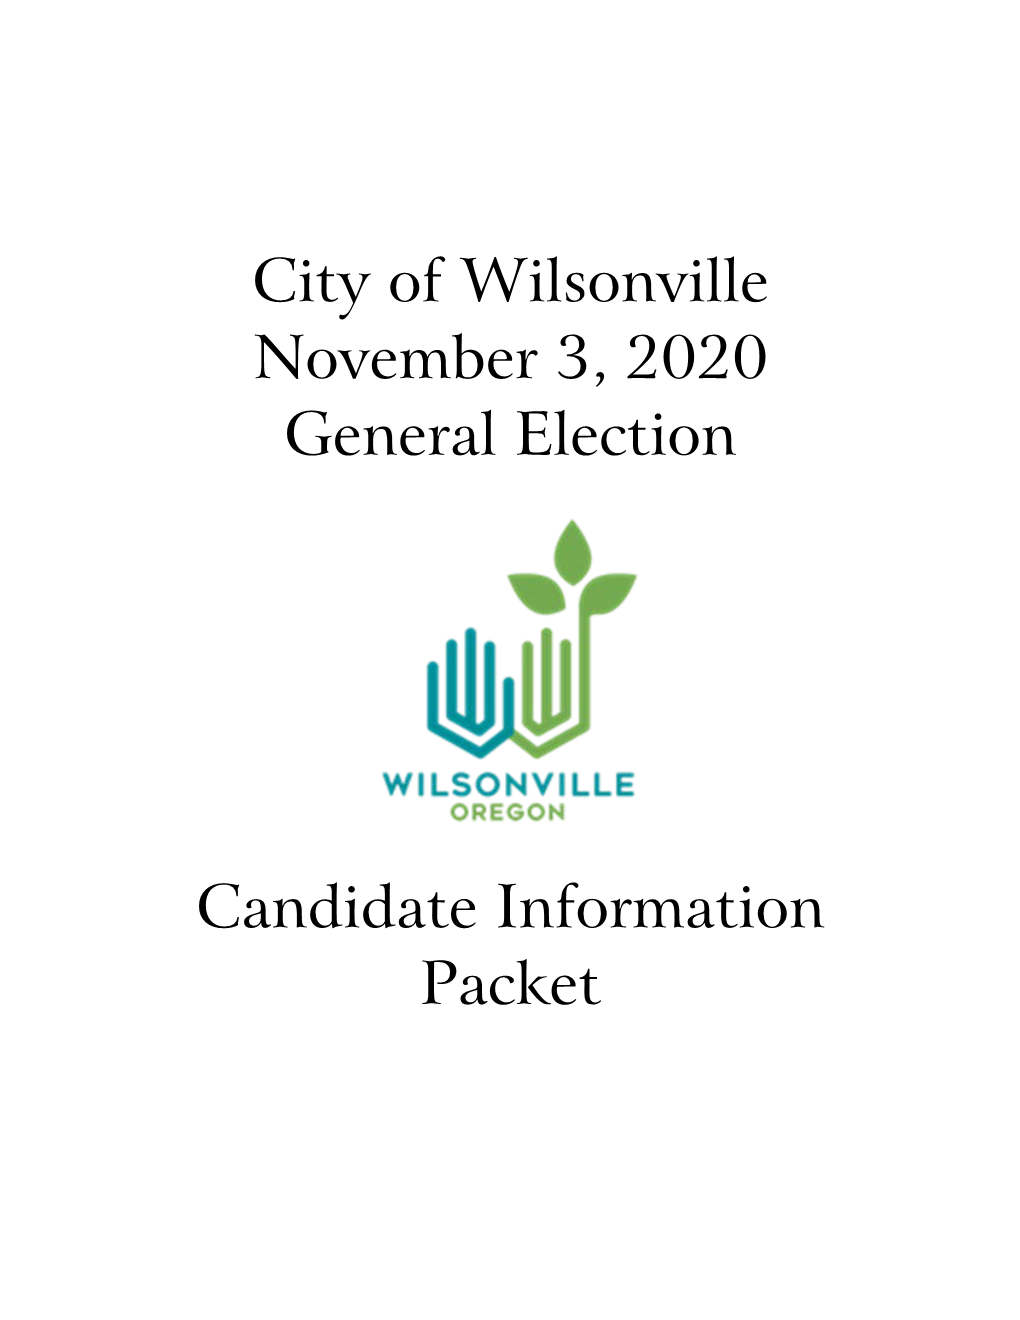 Candidate Filing Information Packet